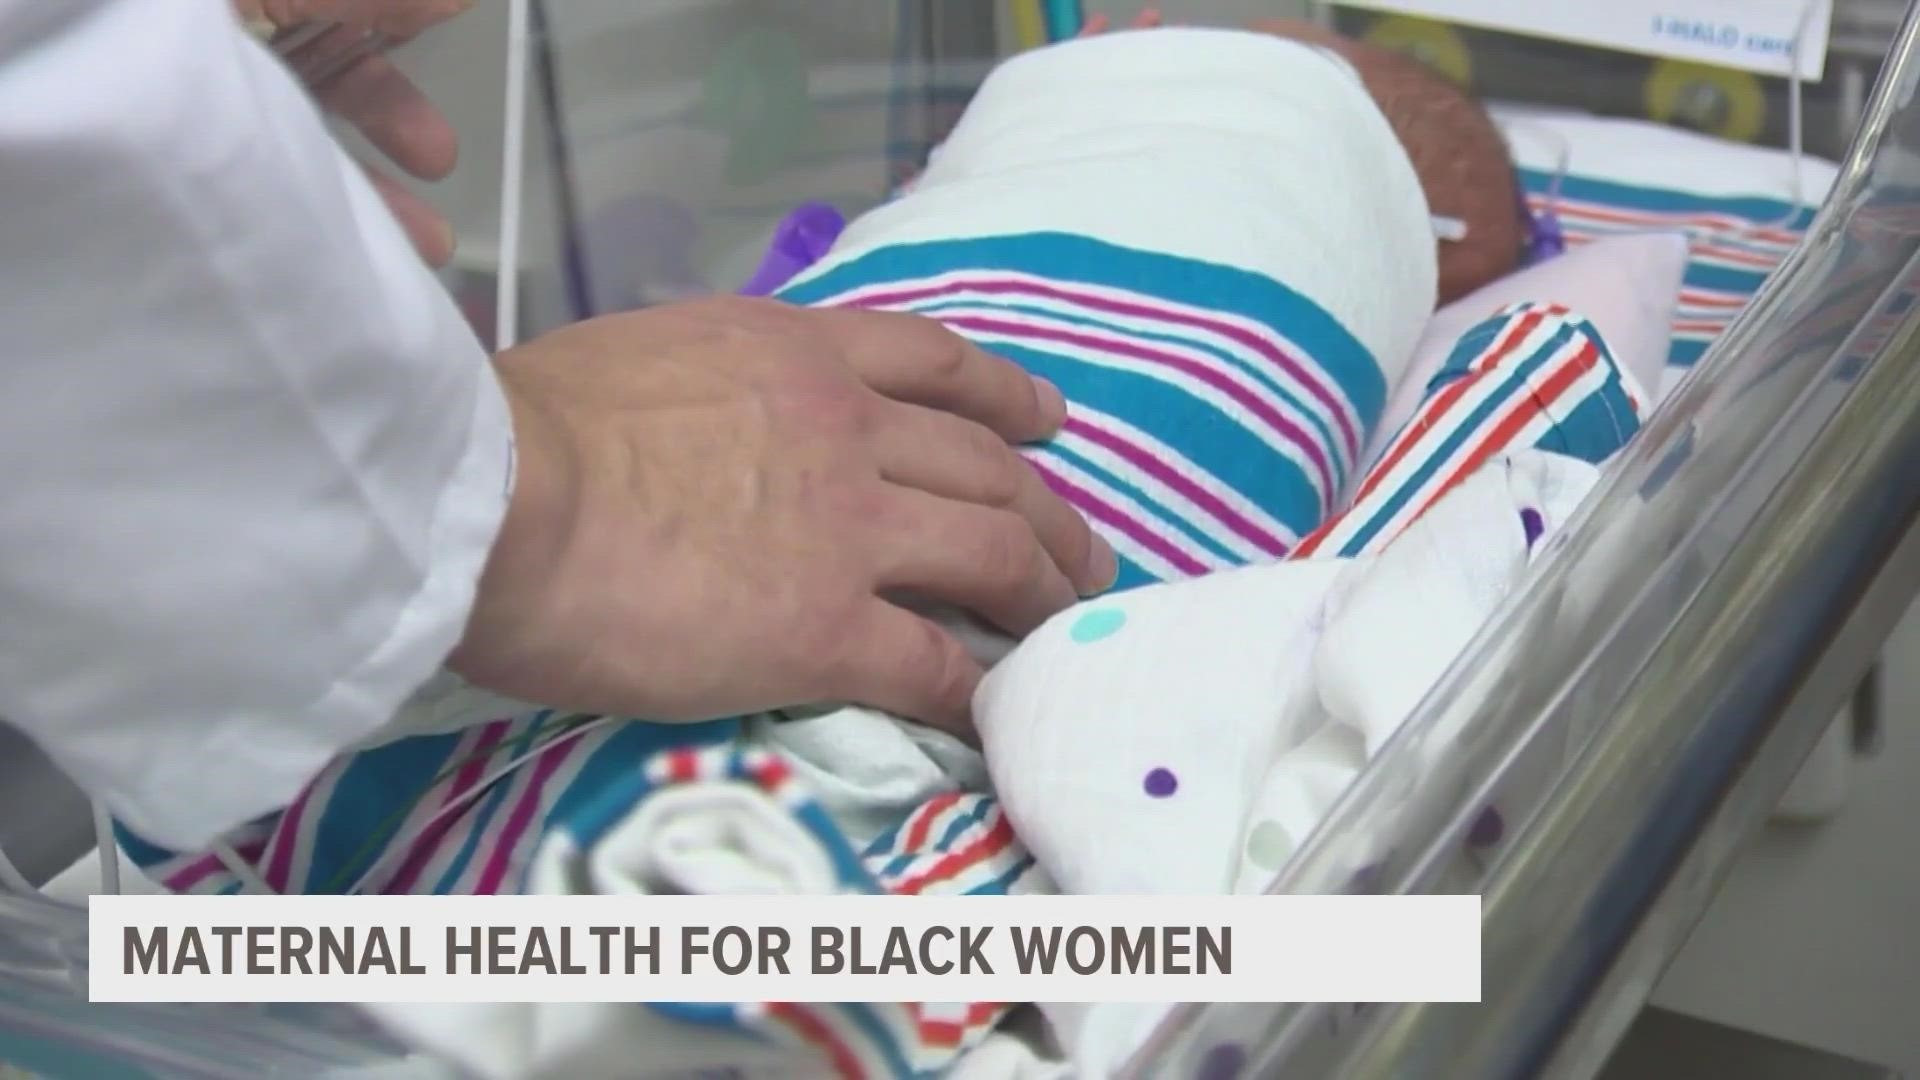 Des Moines organizations are looking to improve maternal medical access for Black women, who are more likely to endure a stillbirth than white expecting parents.